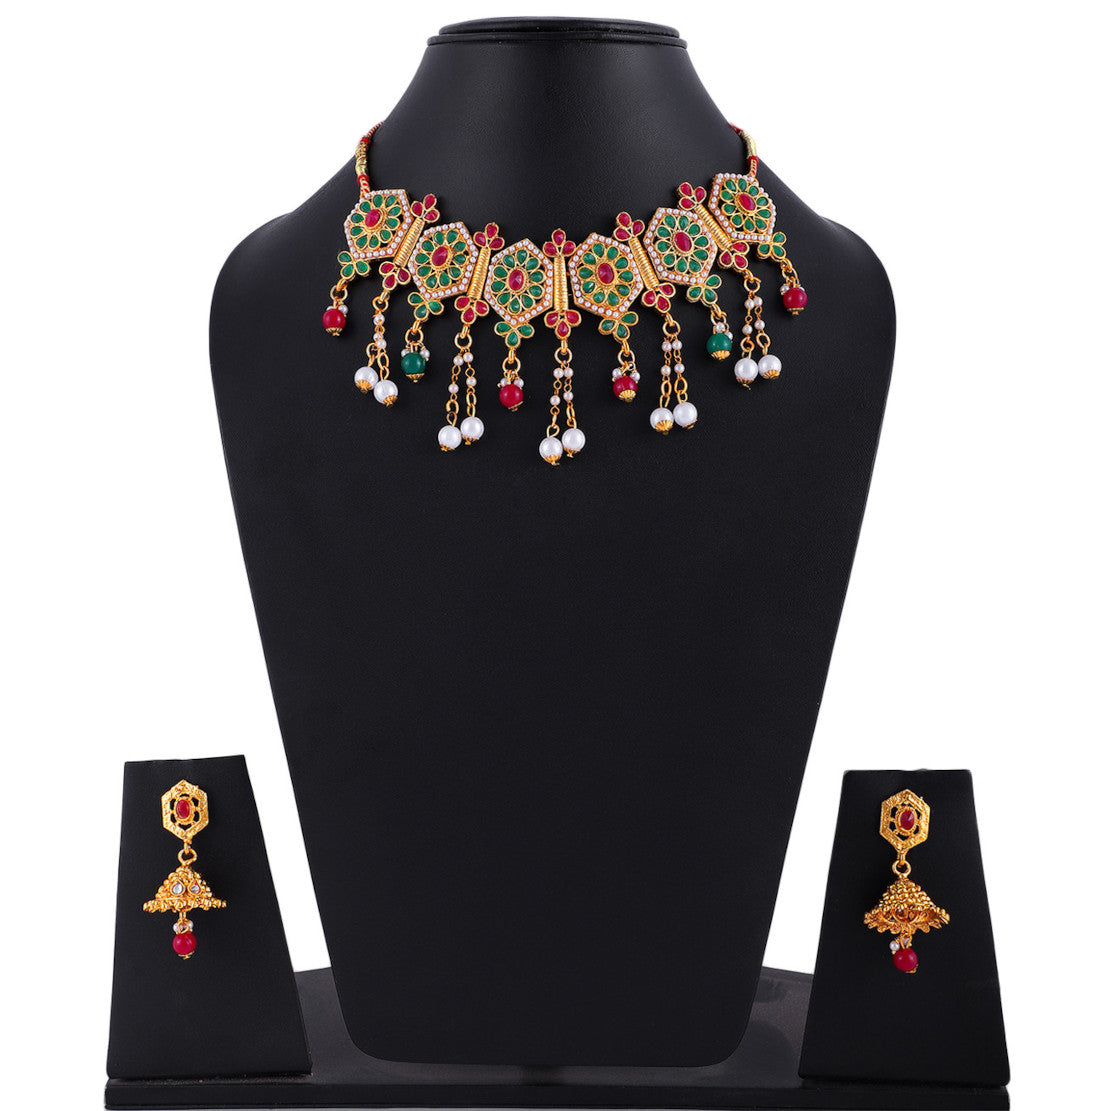  Best Traditional Handcrafted Designed by Mekkna of Necklace with Earrings for Women | Buy This Necklace Online from Mekkna